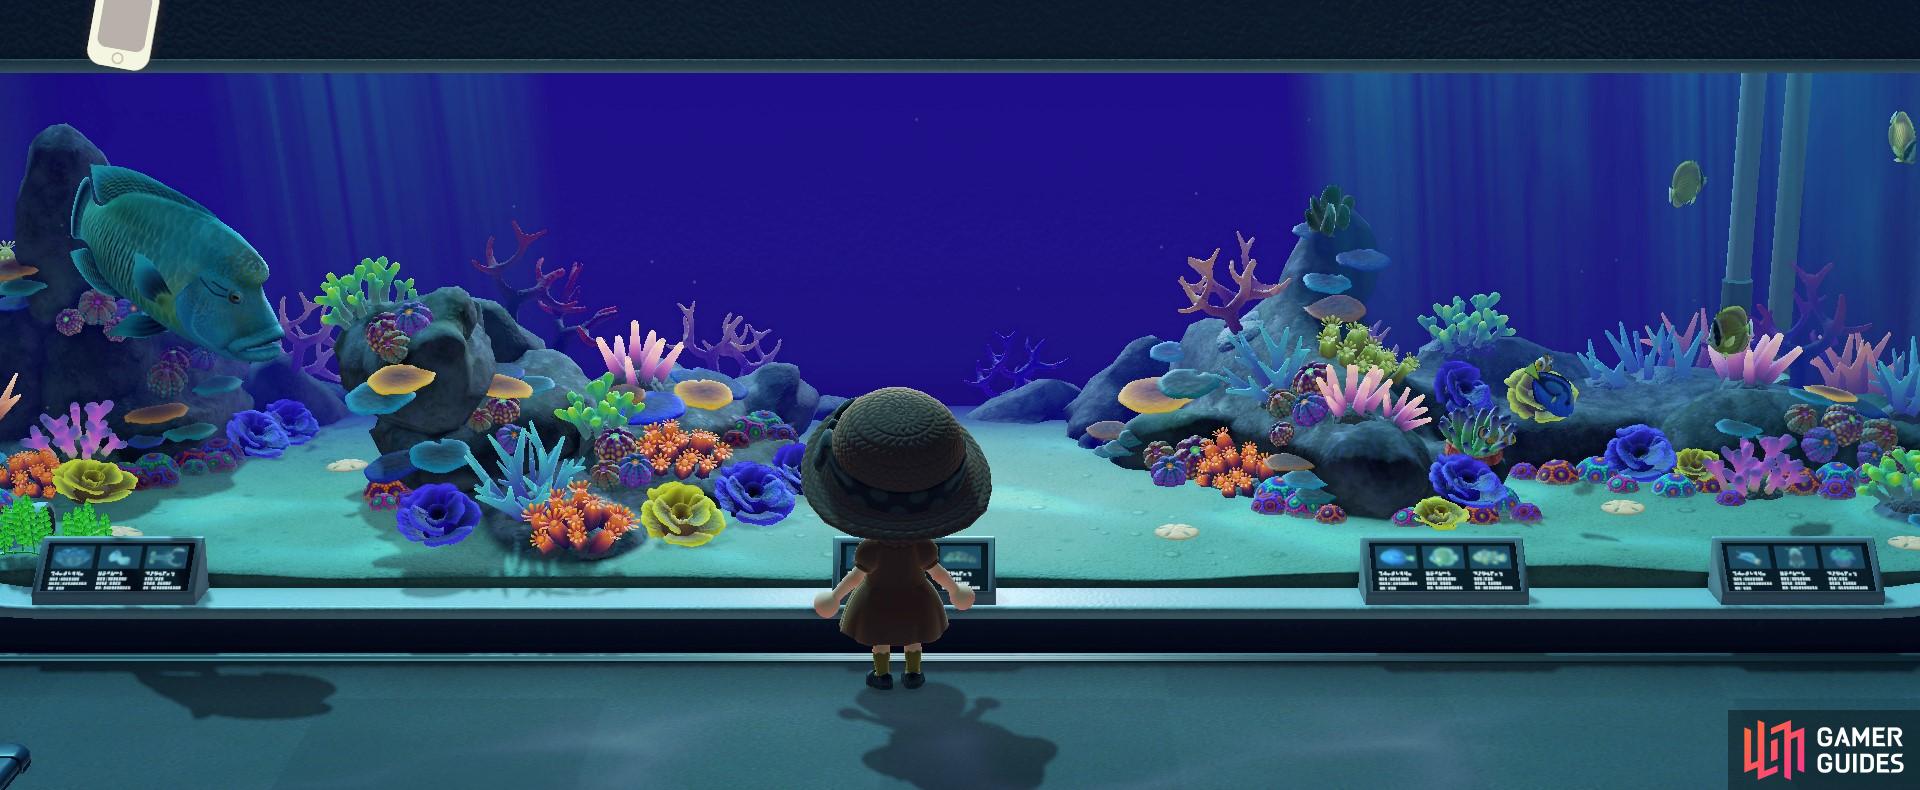 Sea Creatures Exhibitions - Fish Wing - Museum Exhibitions | Animal Crossing:  New Horizons | Gamer Guides®